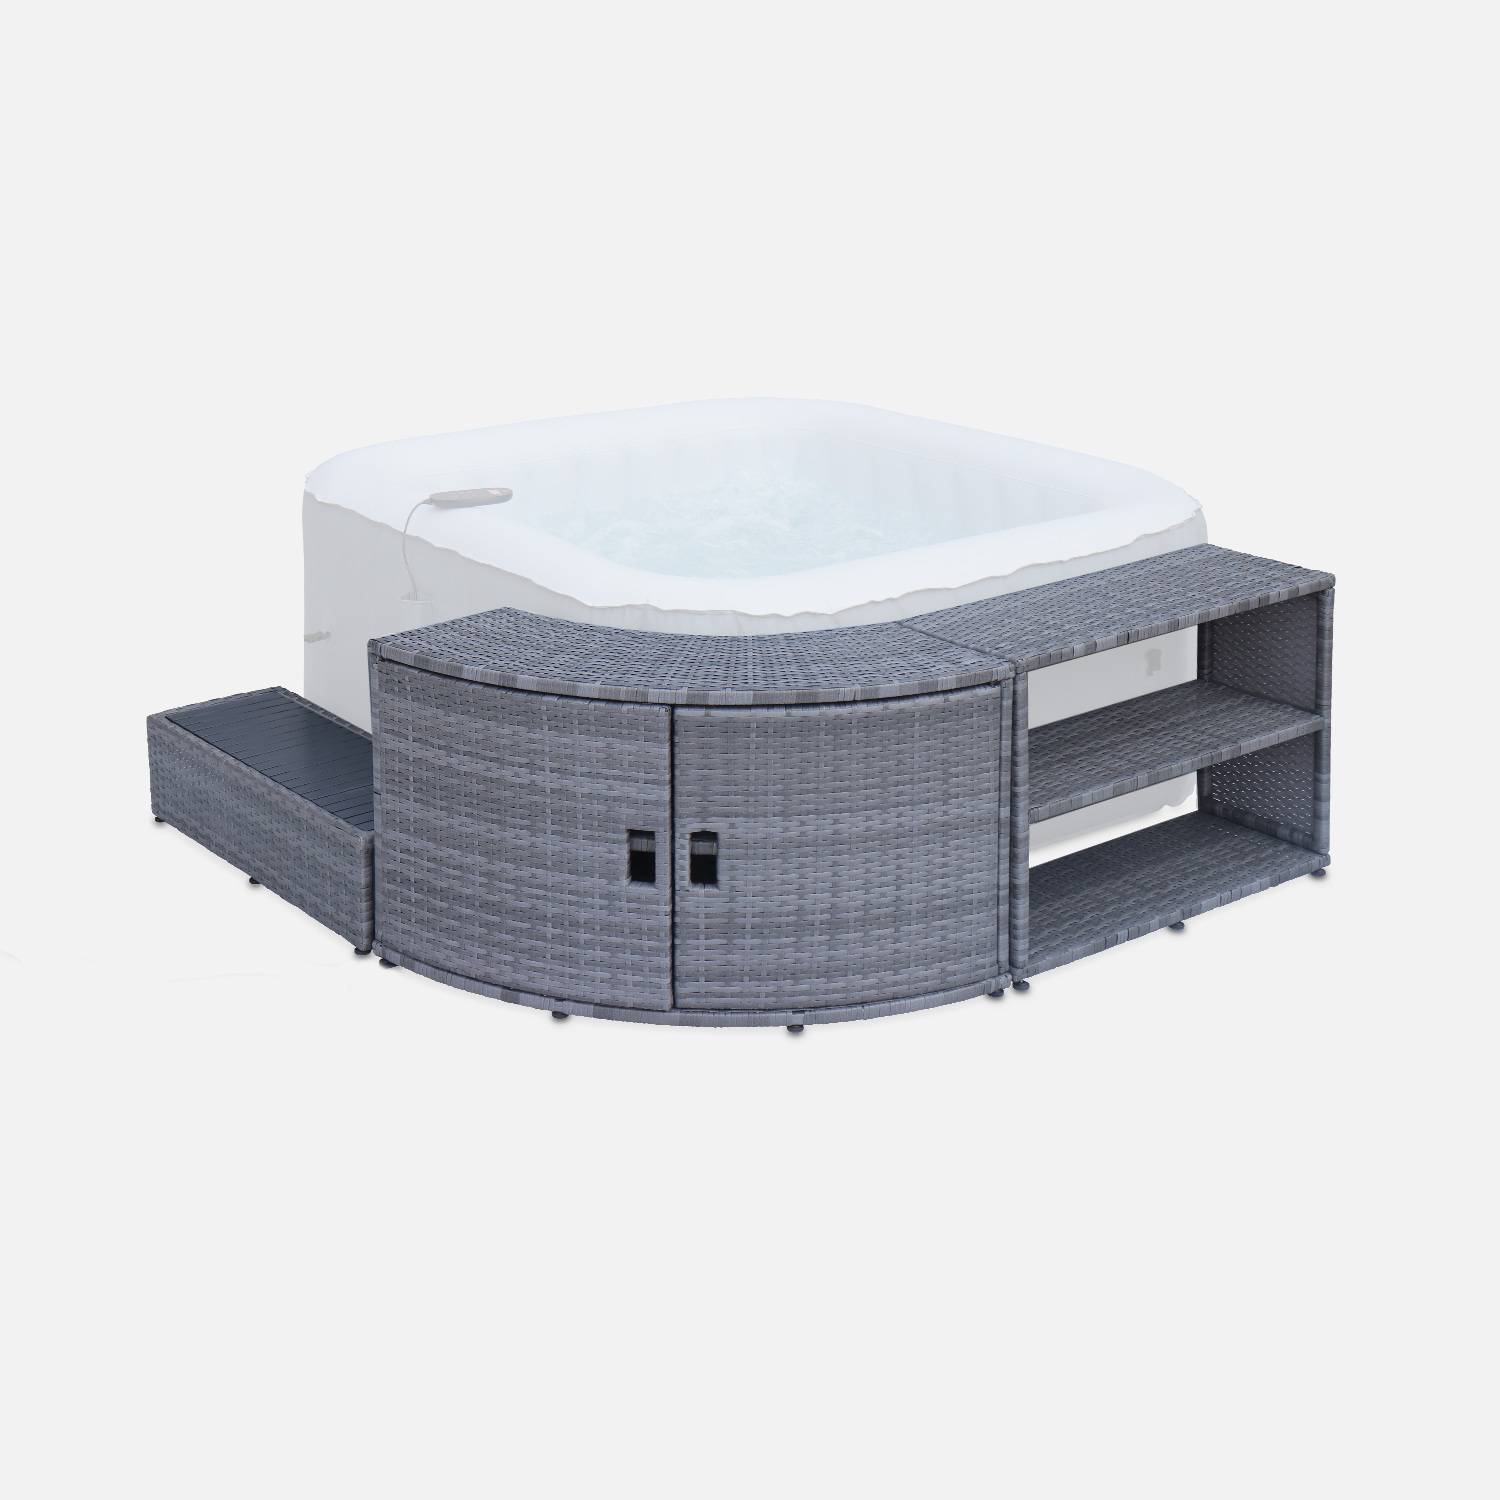 Grey polyrattan surround for square hot tub with cabinet, shelf and footstep Photo1